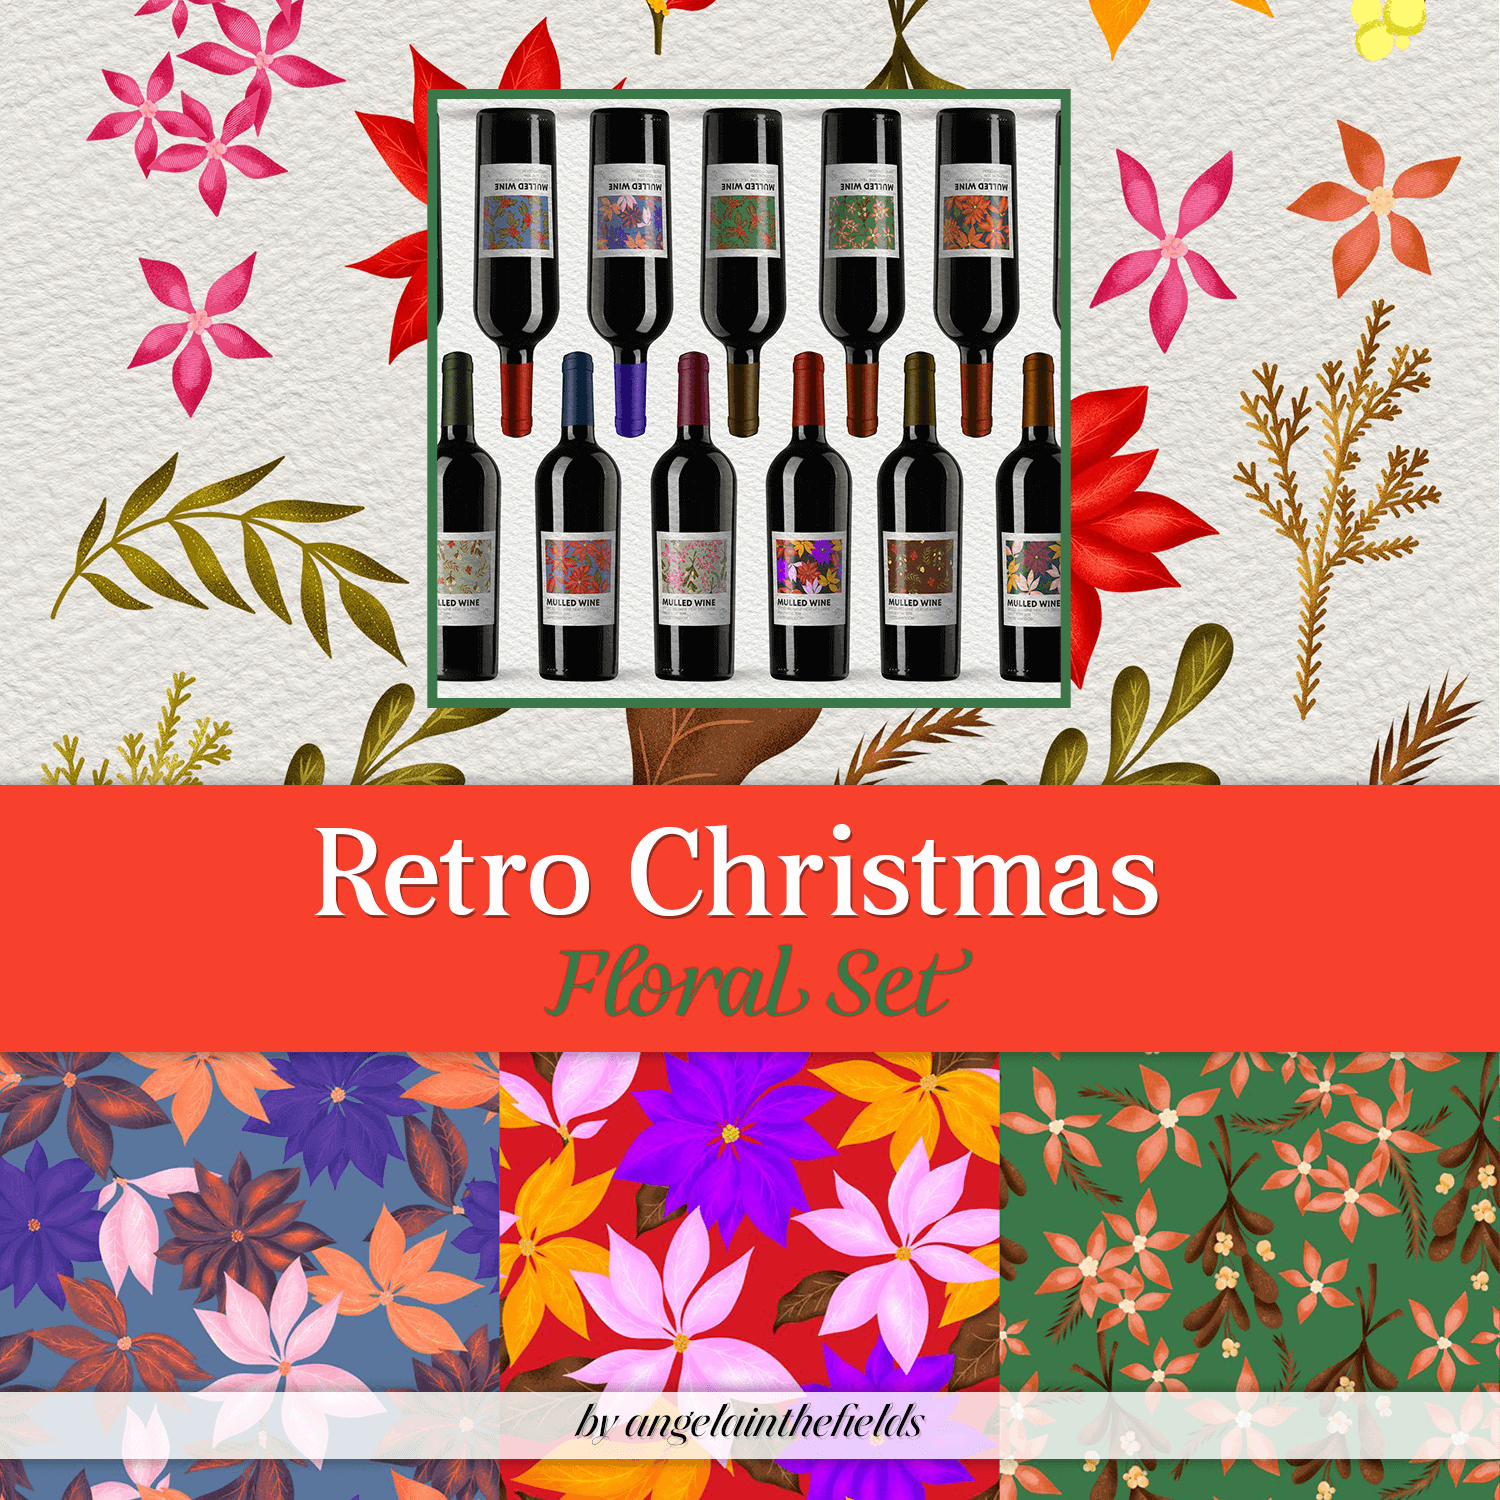 Retro Christmas floral and wine set.